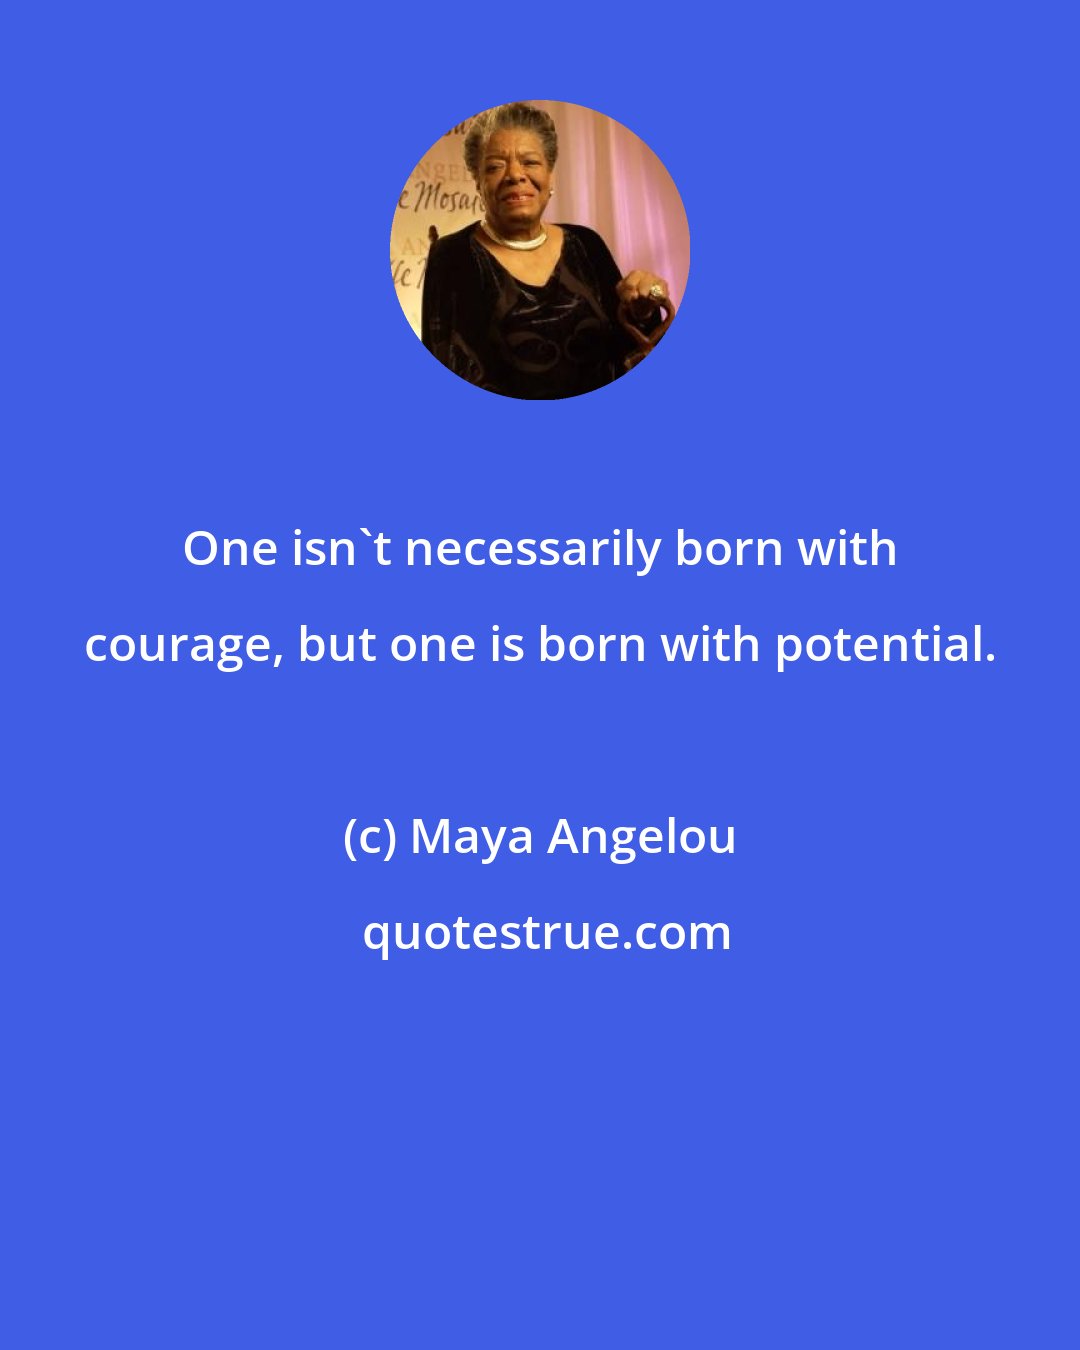 Maya Angelou: One isn't necessarily born with courage, but one is born with potential.